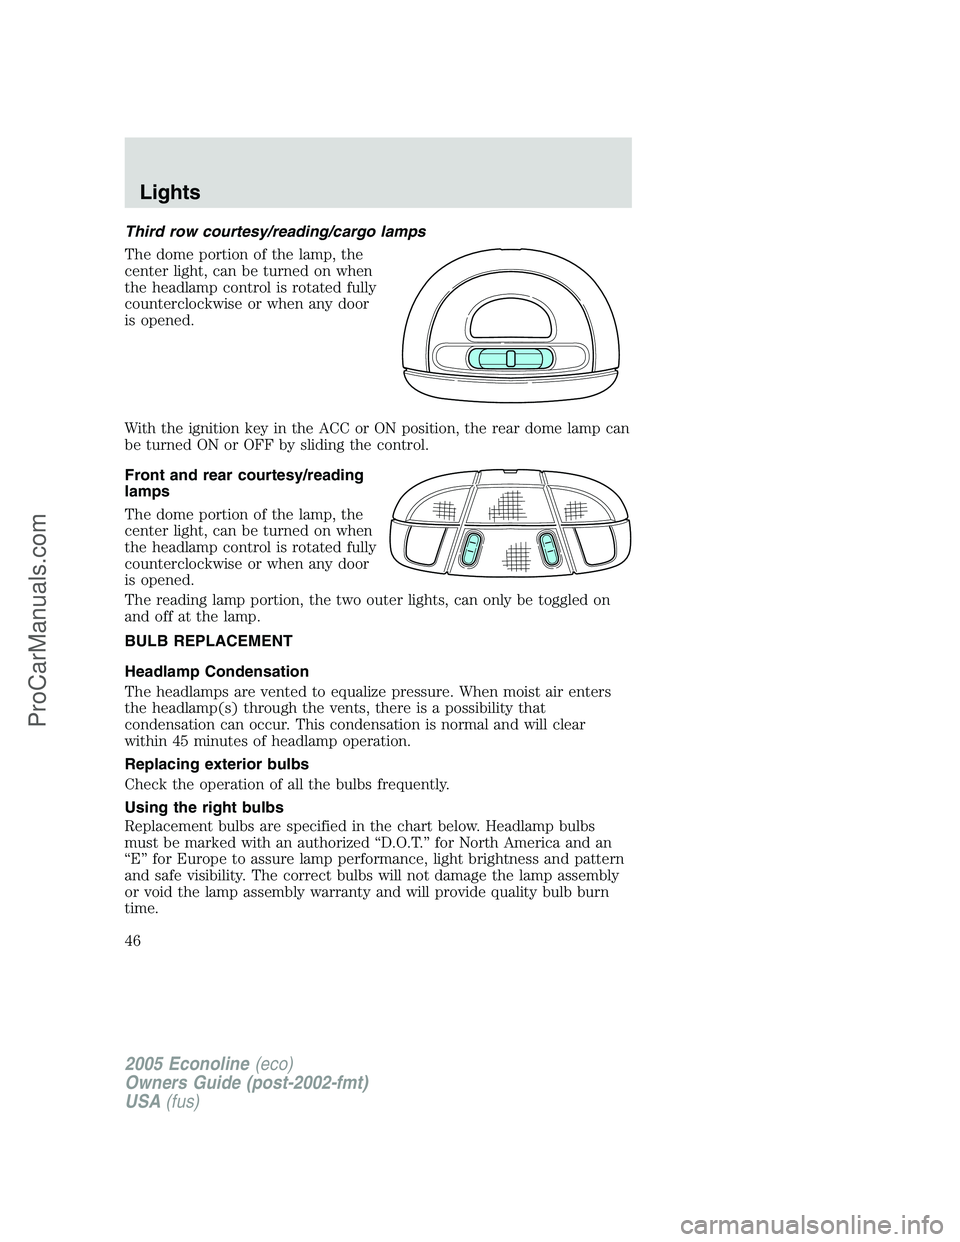 FORD E-150 2005  Owners Manual Third row courtesy/reading/cargo lamps
The dome portion of the lamp, the
center light, can be turned on when
the headlamp control is rotated fully
counterclockwise or when any door
is opened.
With the